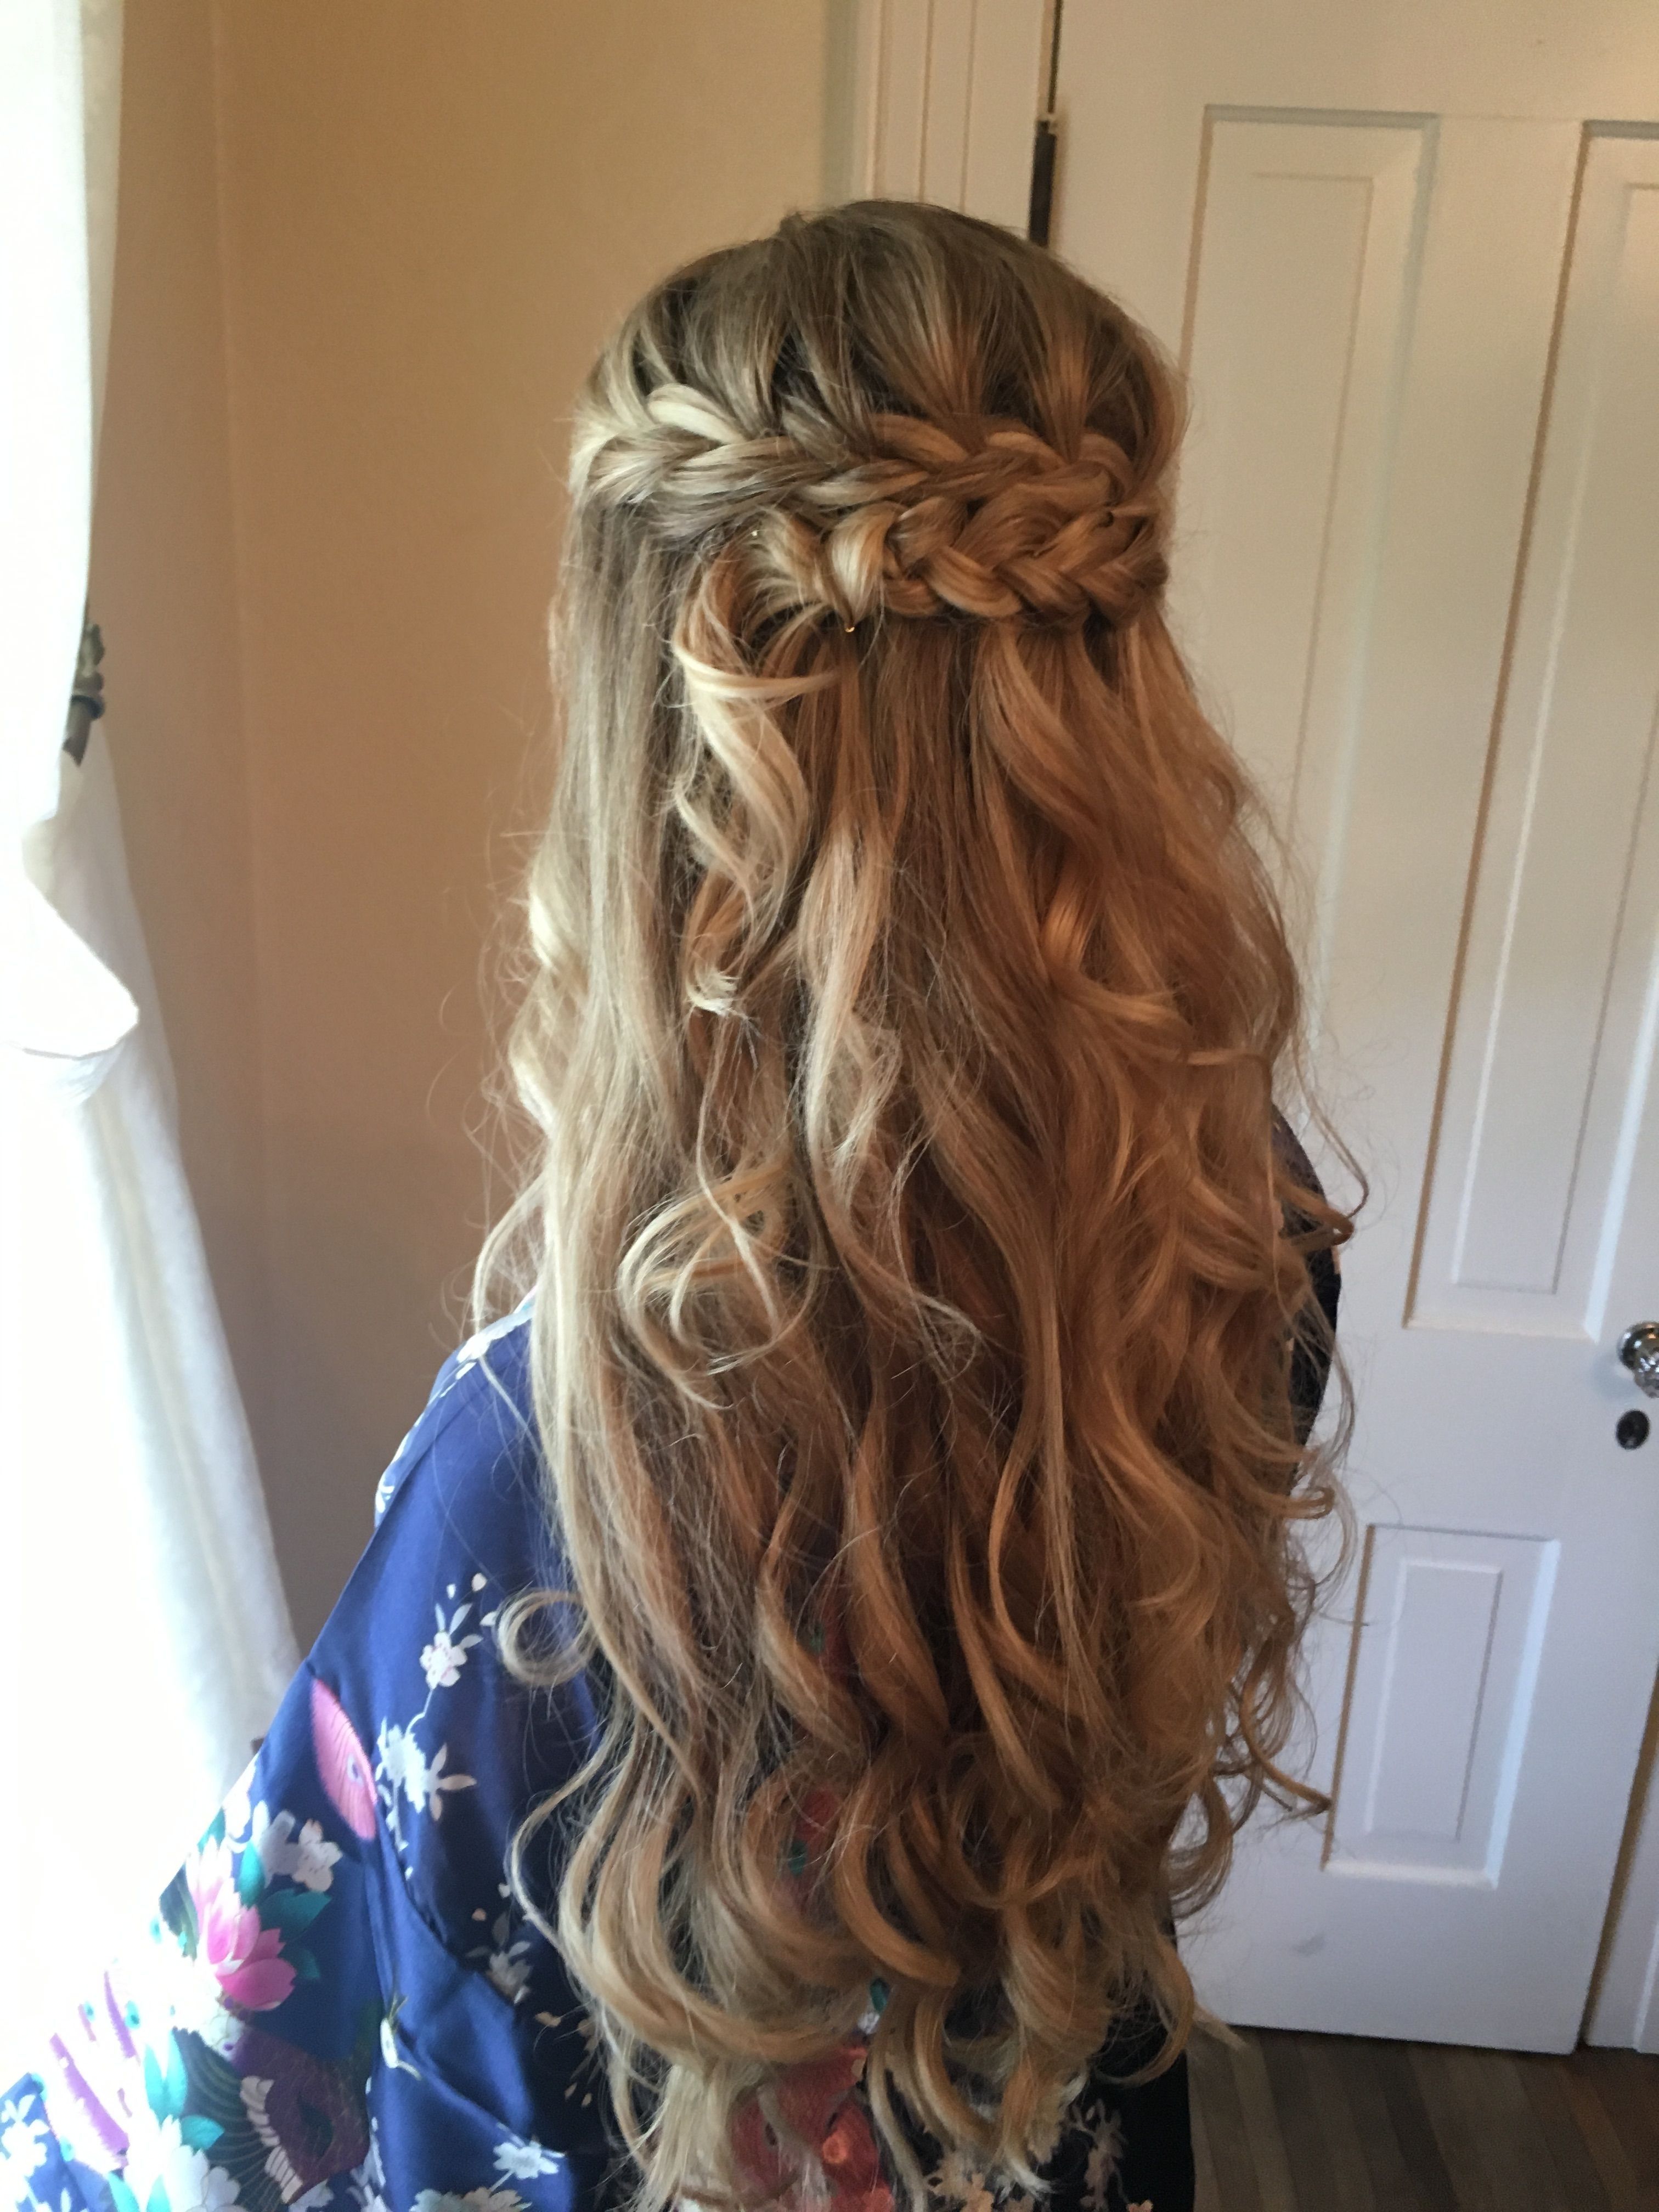 Half Up Half Down Up Do, Braid, Curls, Wedding Hairstyles, Long Hair Within Best And Newest Wedding Hairstyles For Long Brown Hair (View 5 of 15)